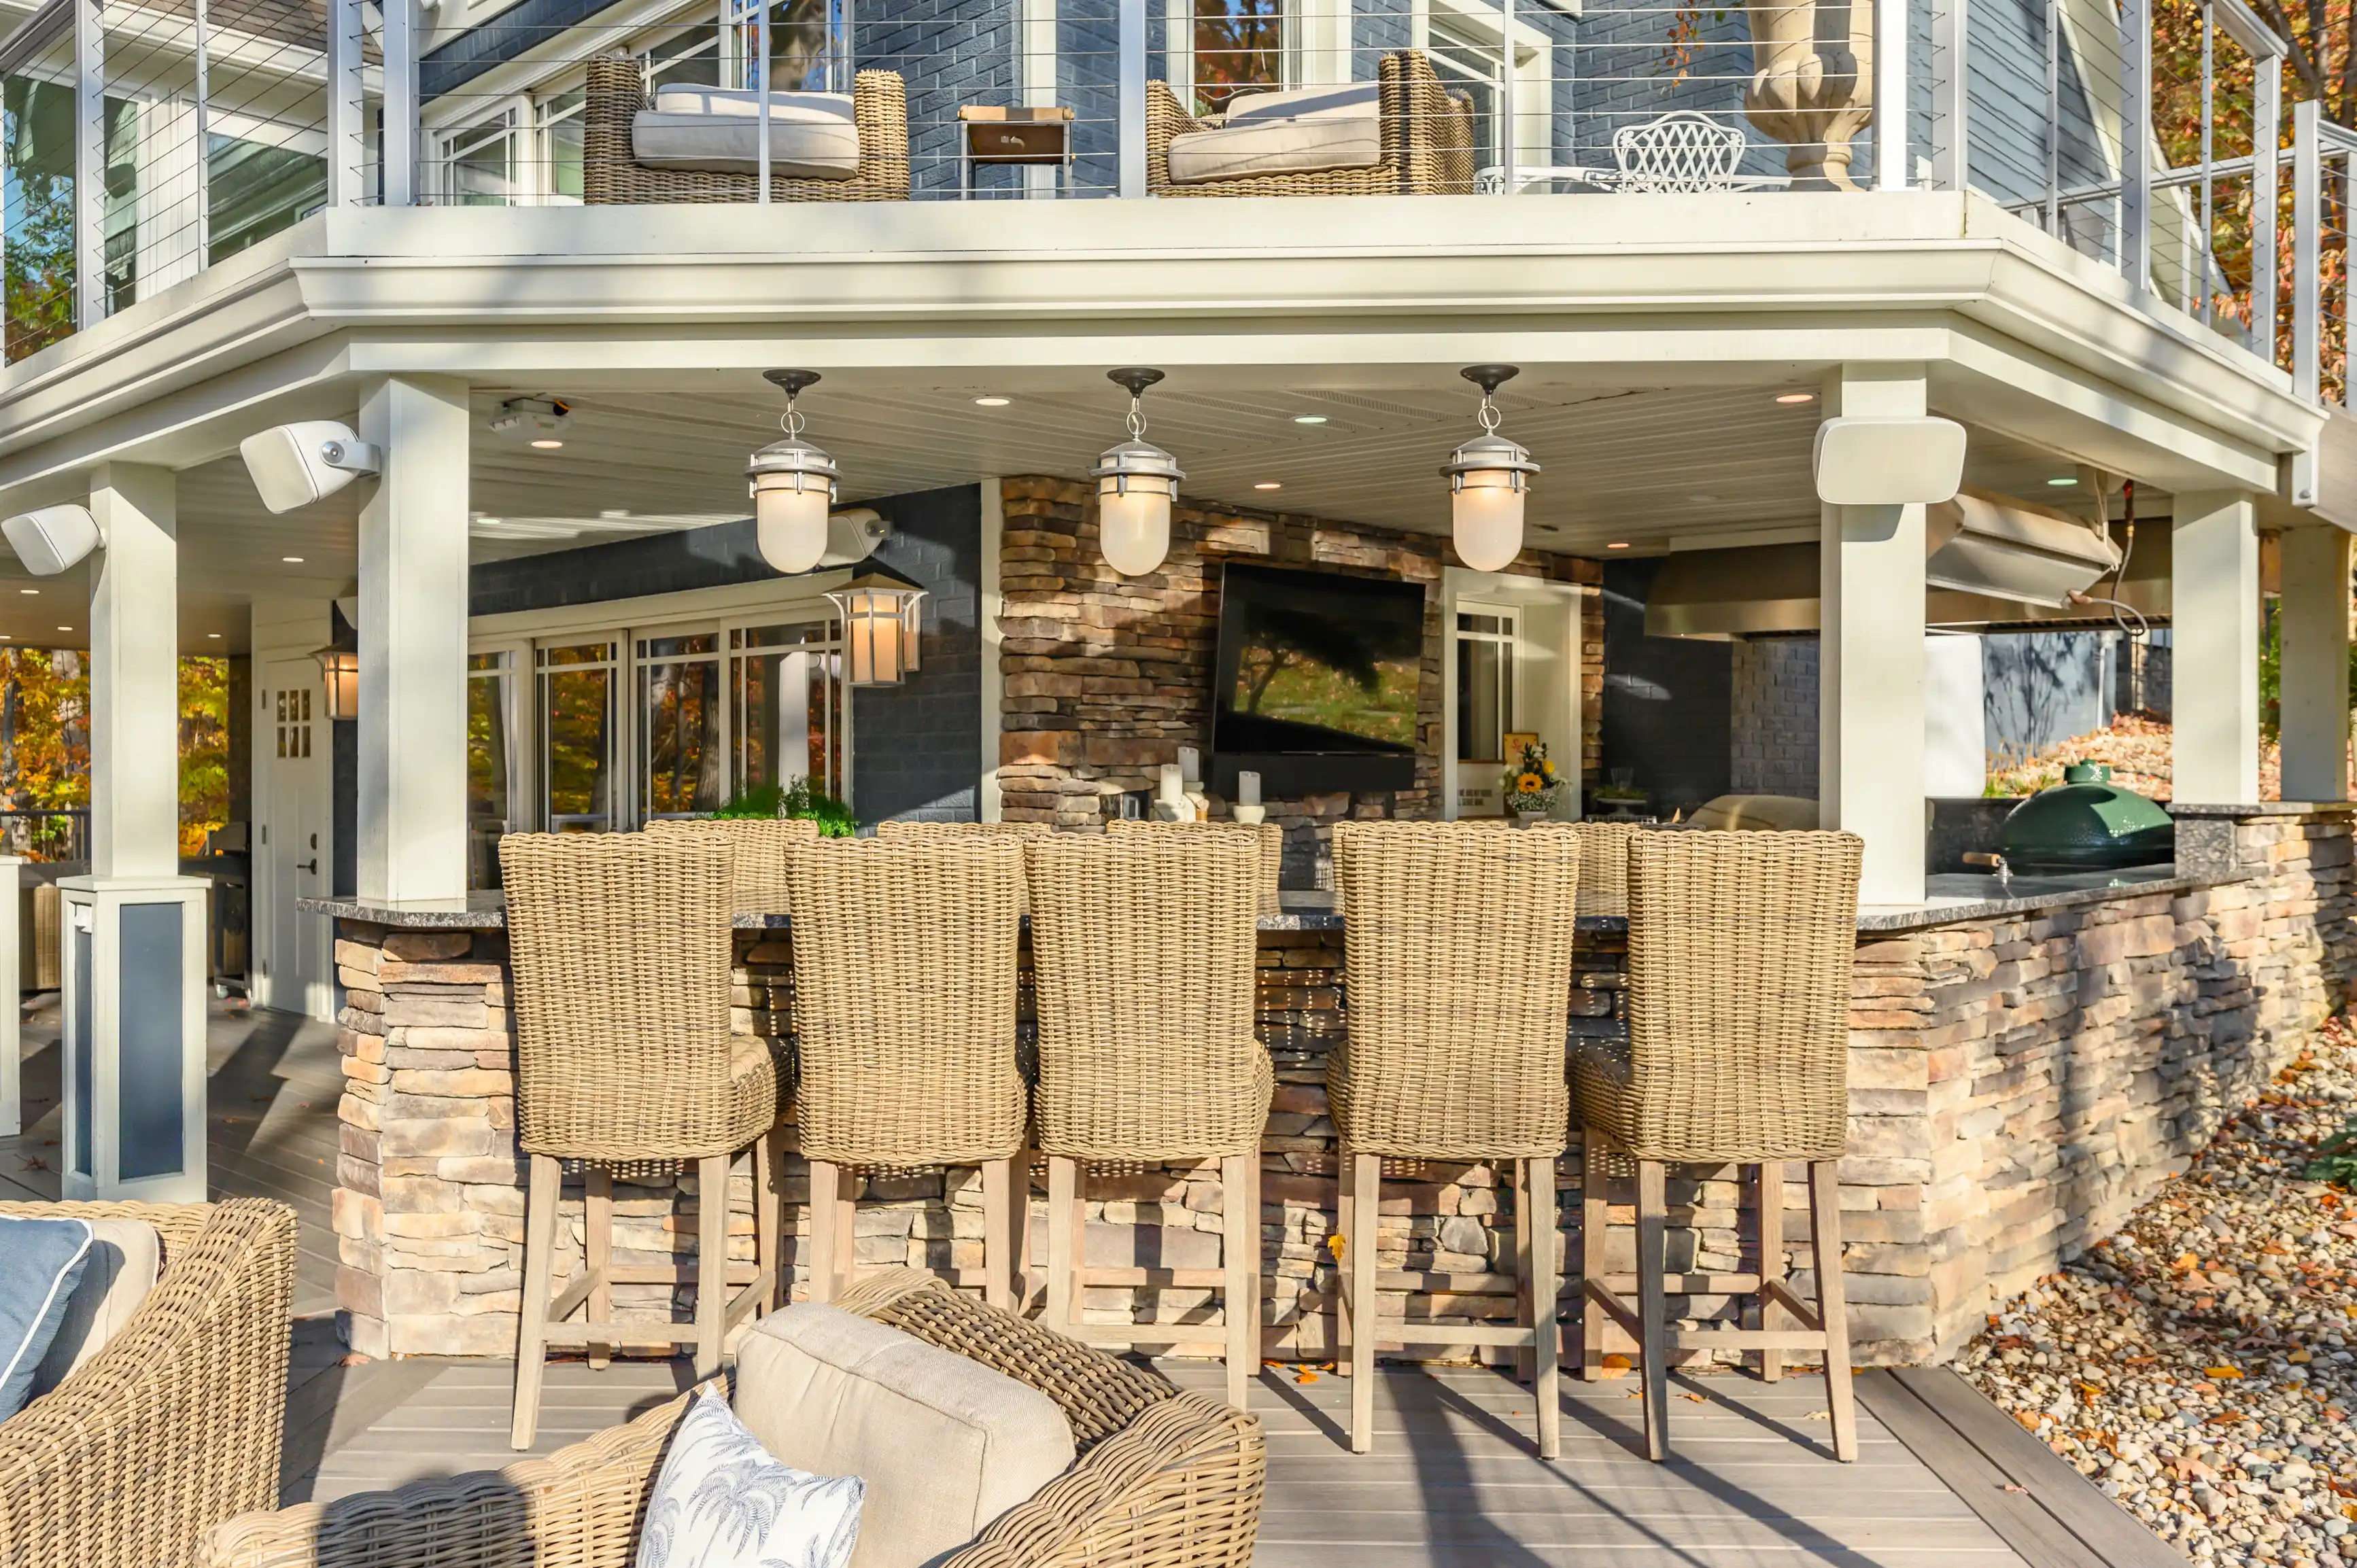 Elegant outdoor patio area with wicker bar chairs, a stone fireplace, and a built-in barbecue grill under a covered deck.